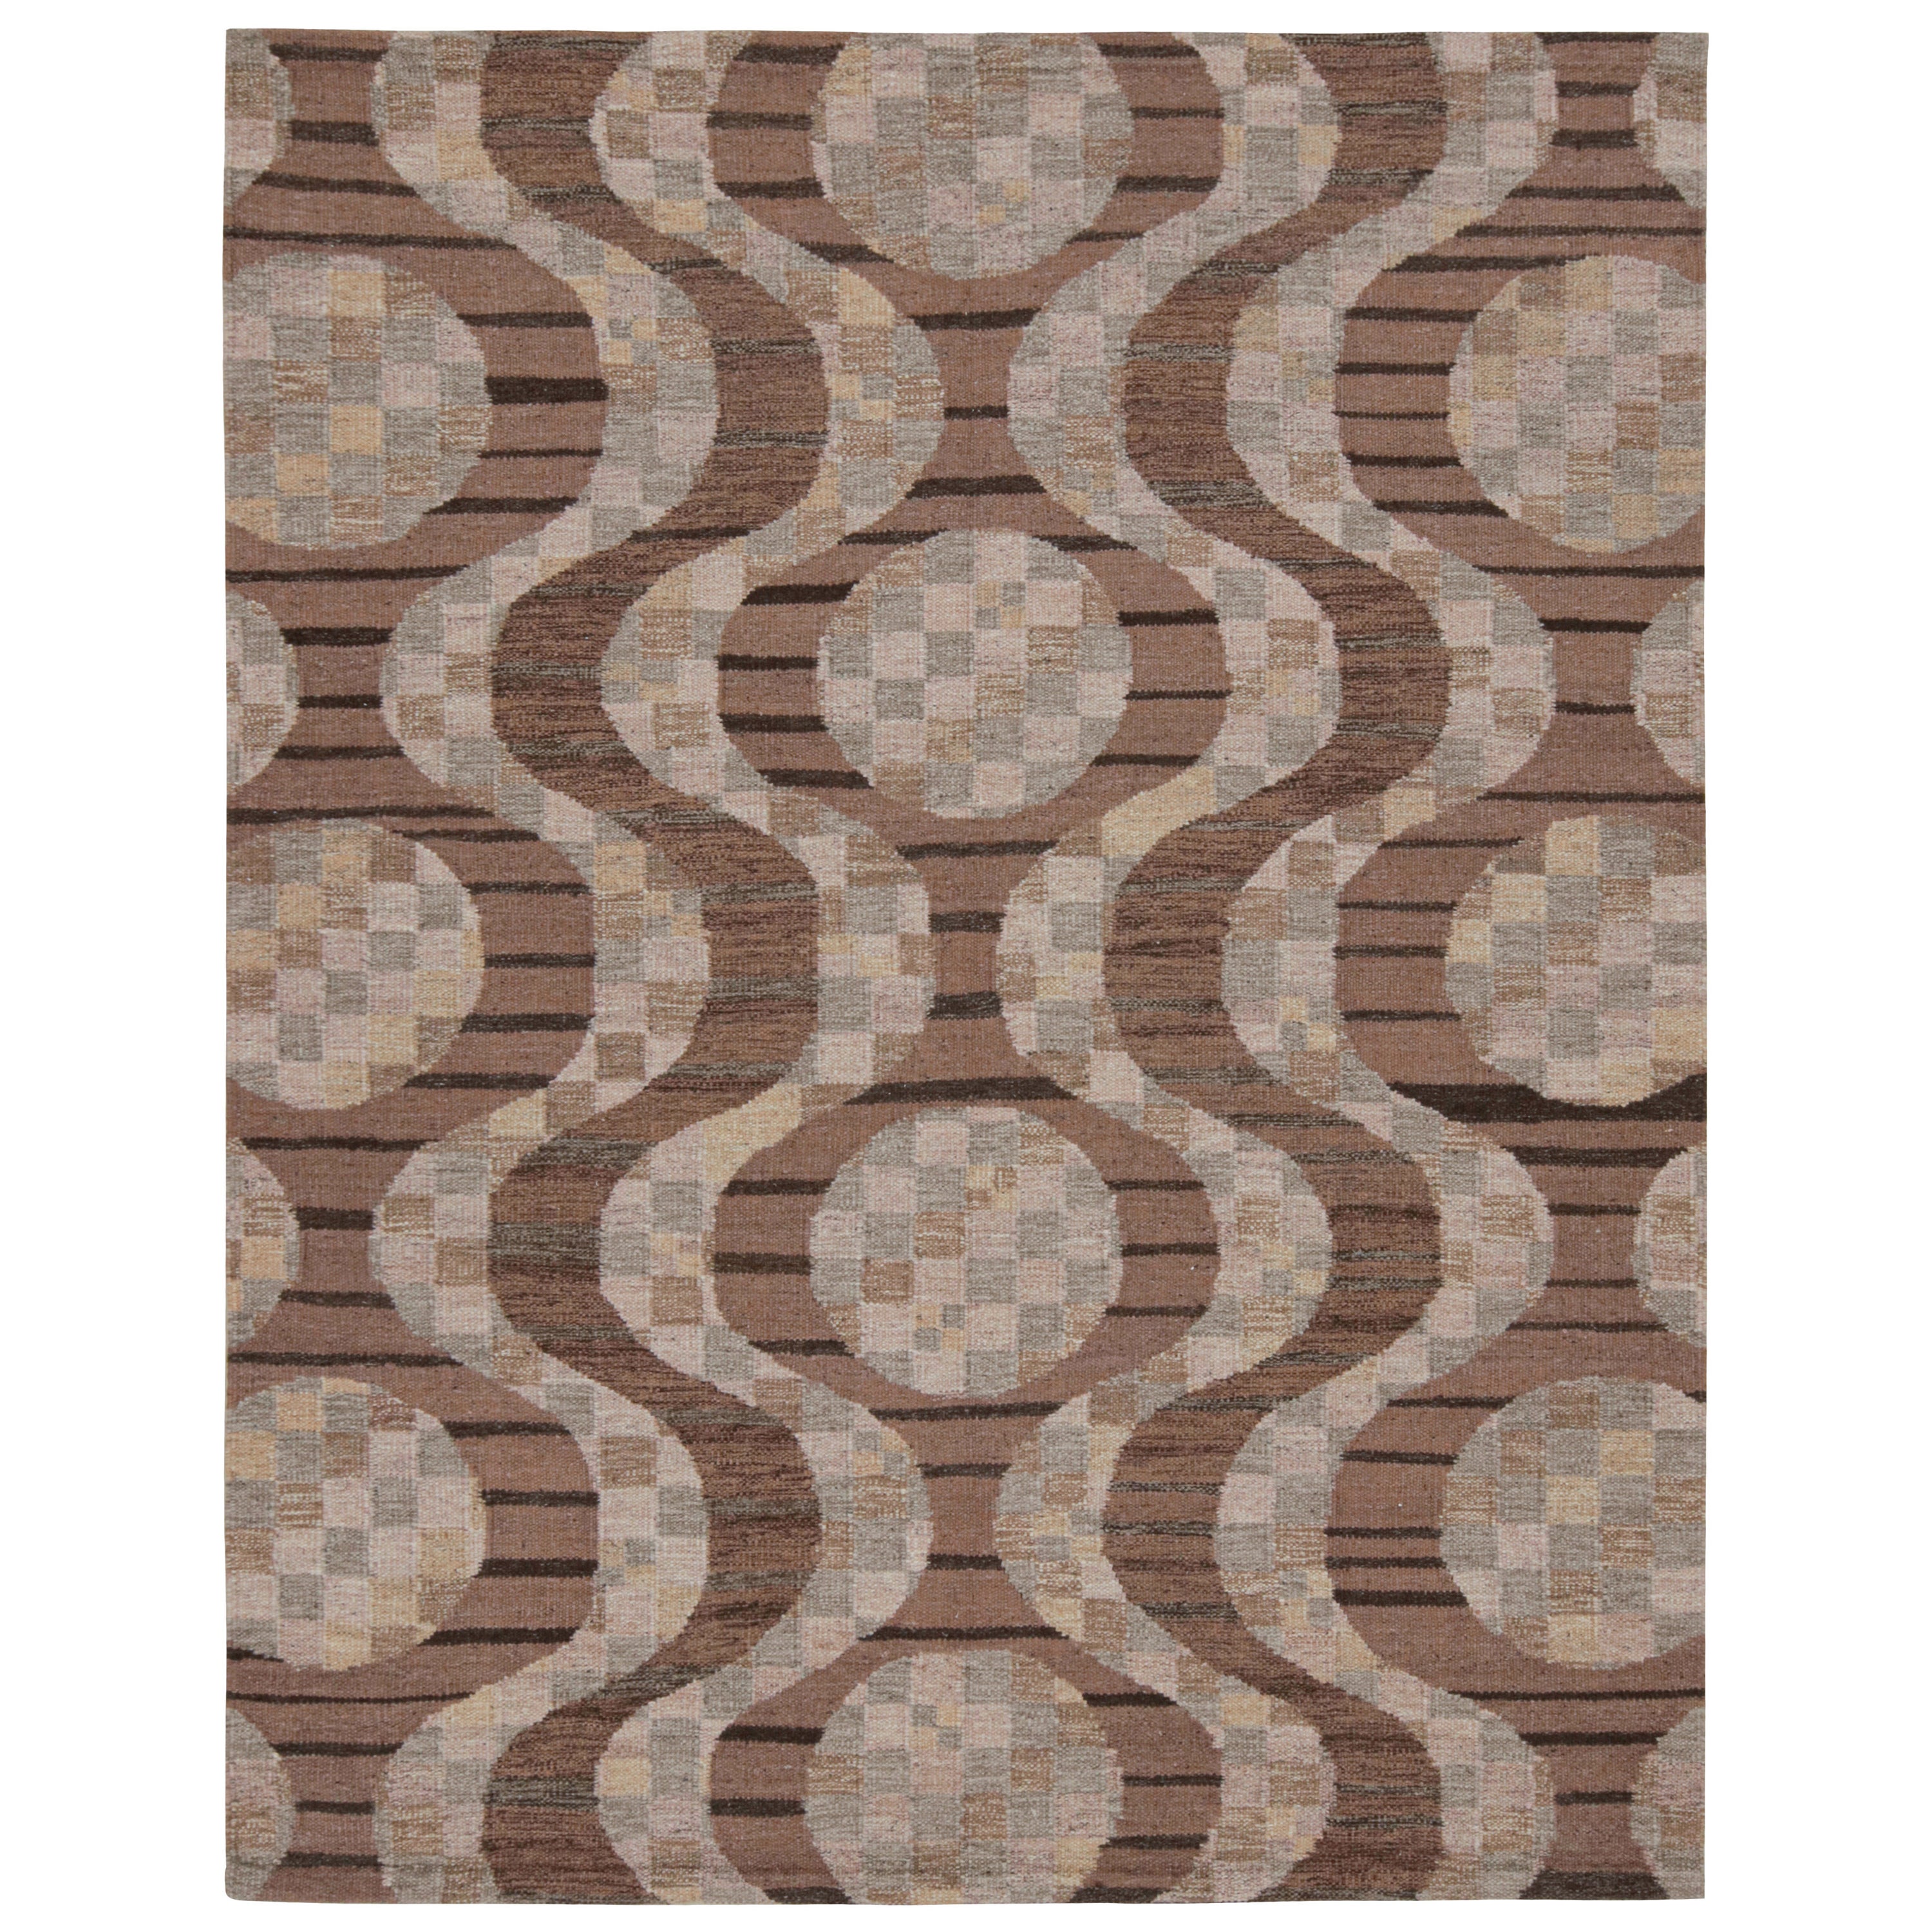 Rug & Kilim’s Scandinavian Style Kilim with Beige-Brown & Gray Patterns For Sale